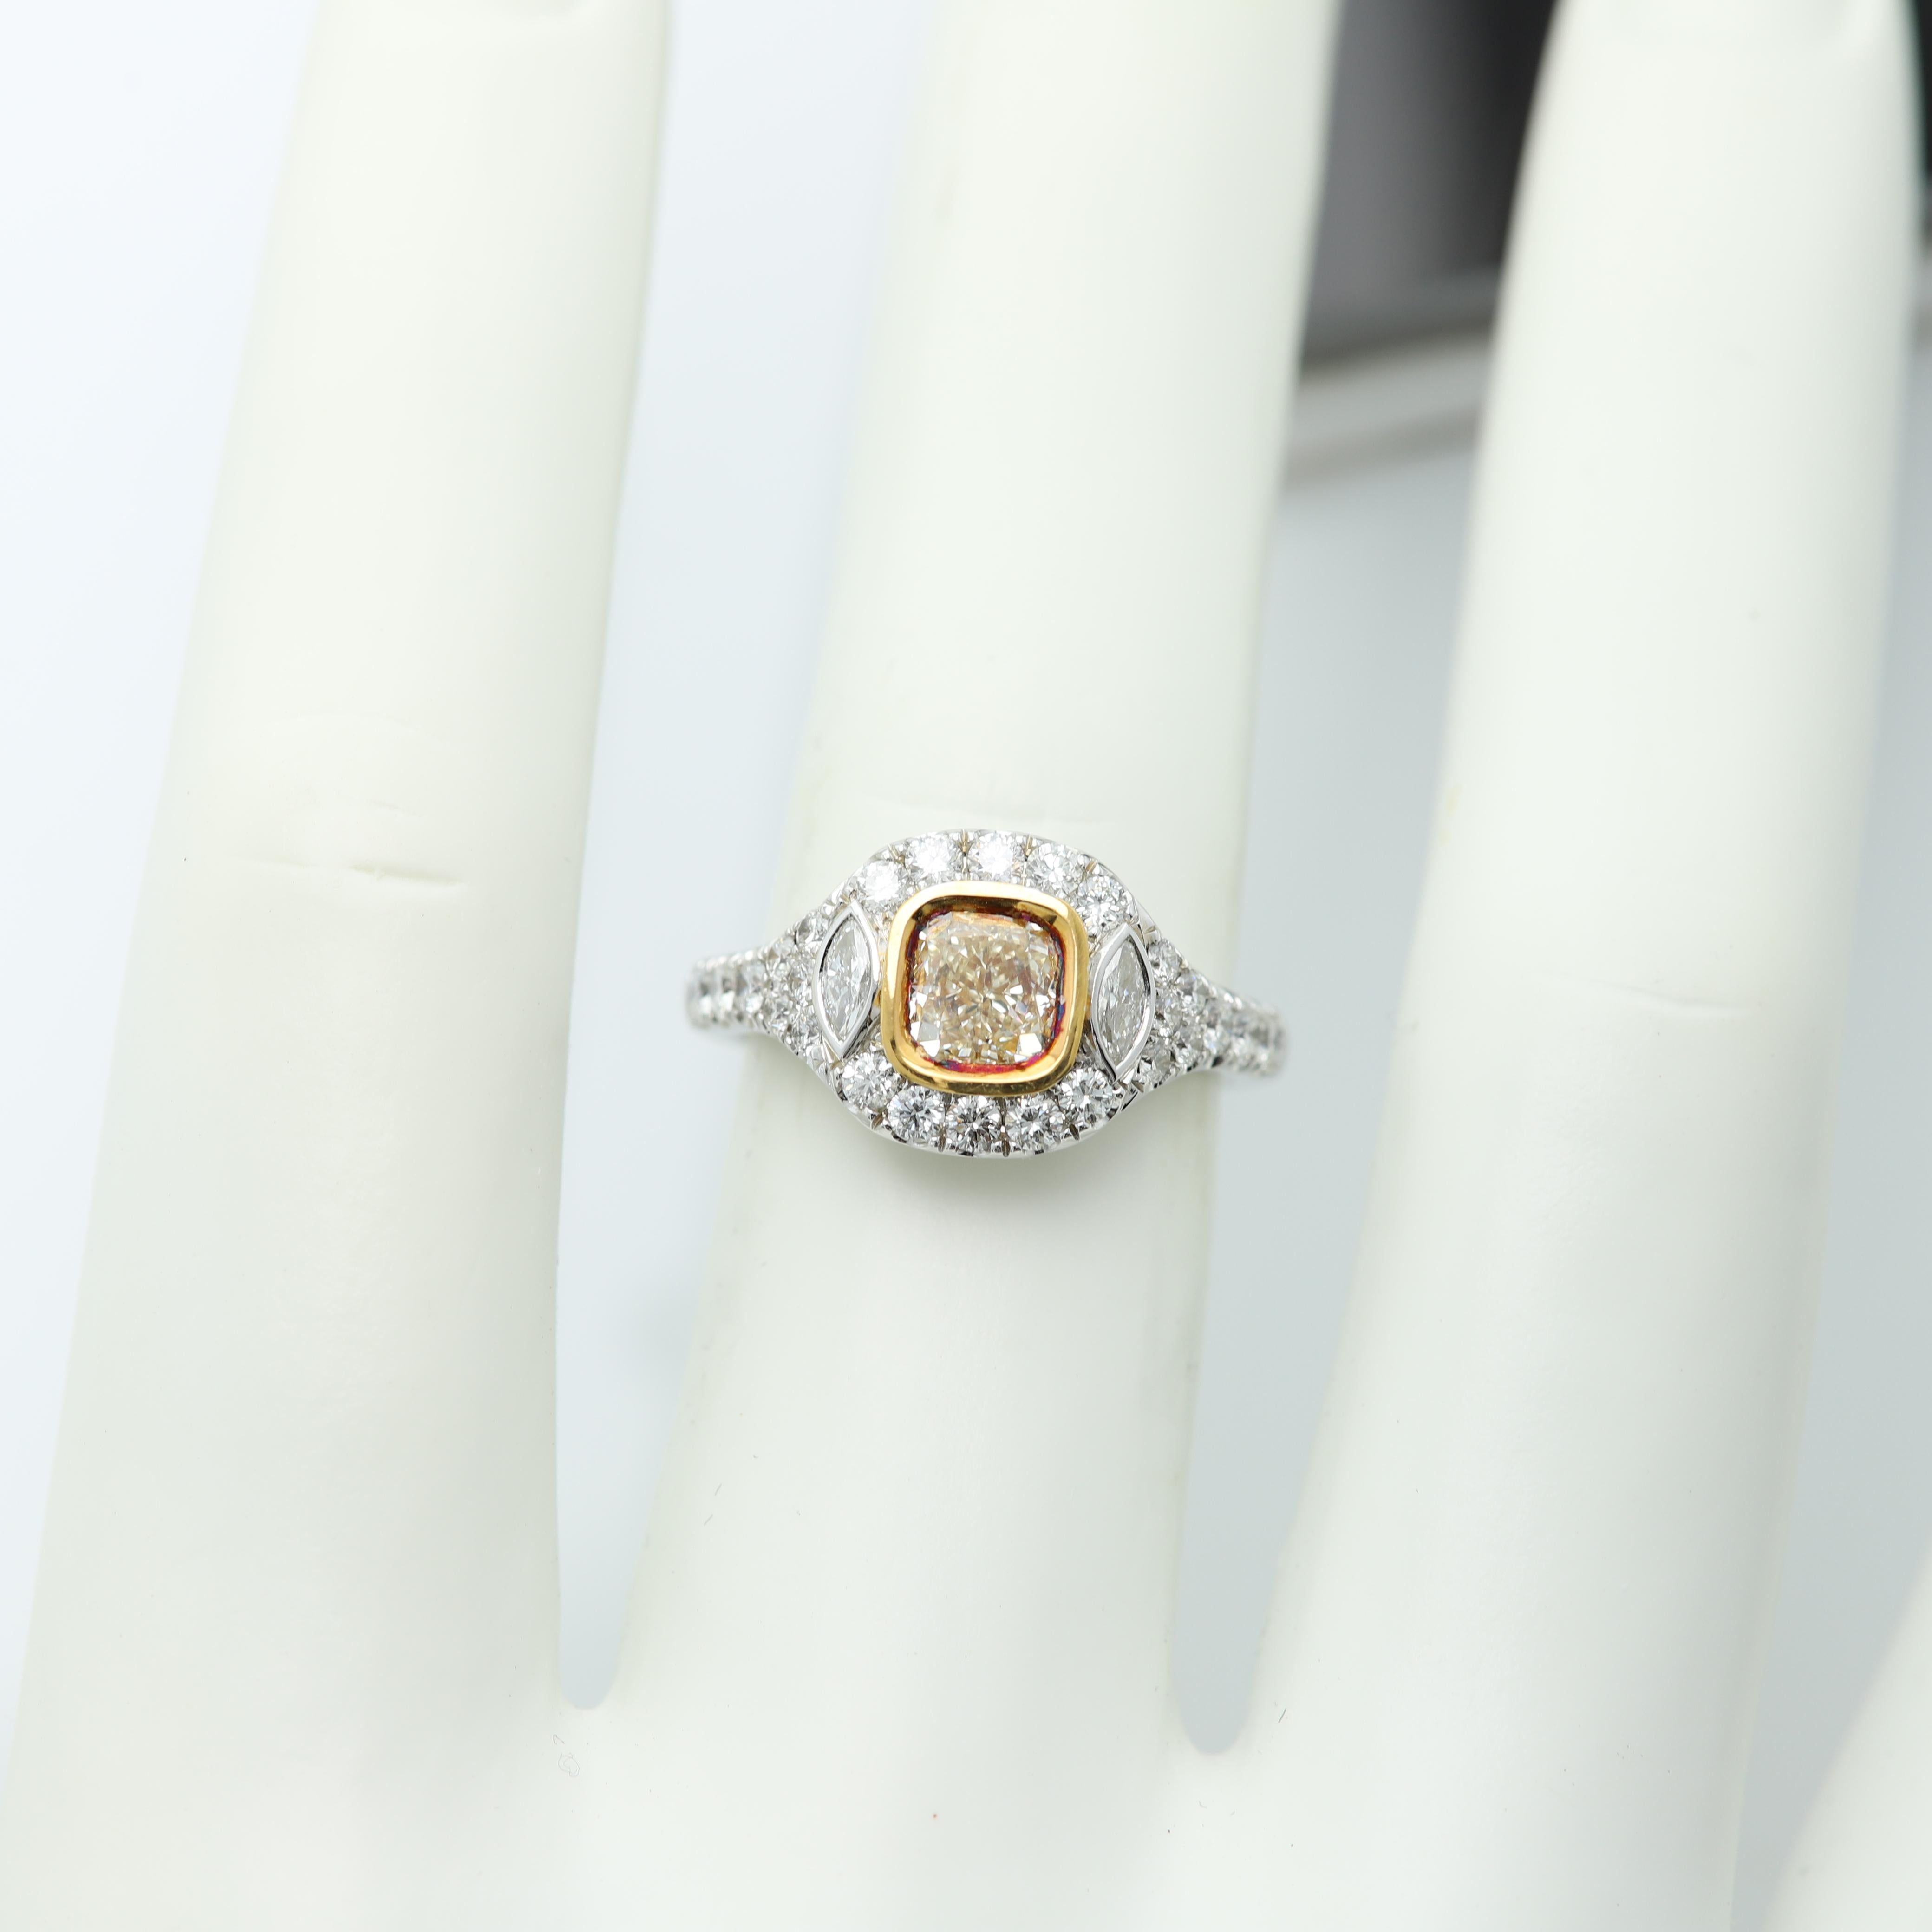 Art Deco Style & Bold Statement Colorful Ring
Center is Light Yellow Diamond sides have regular white Diamonds
All stones are Natural
18k Two Tone Gold 
Light Yellow Diamond size - 1.04 carat cusion cut (6x6 mm) - SI set in cup/bezel setting
Small